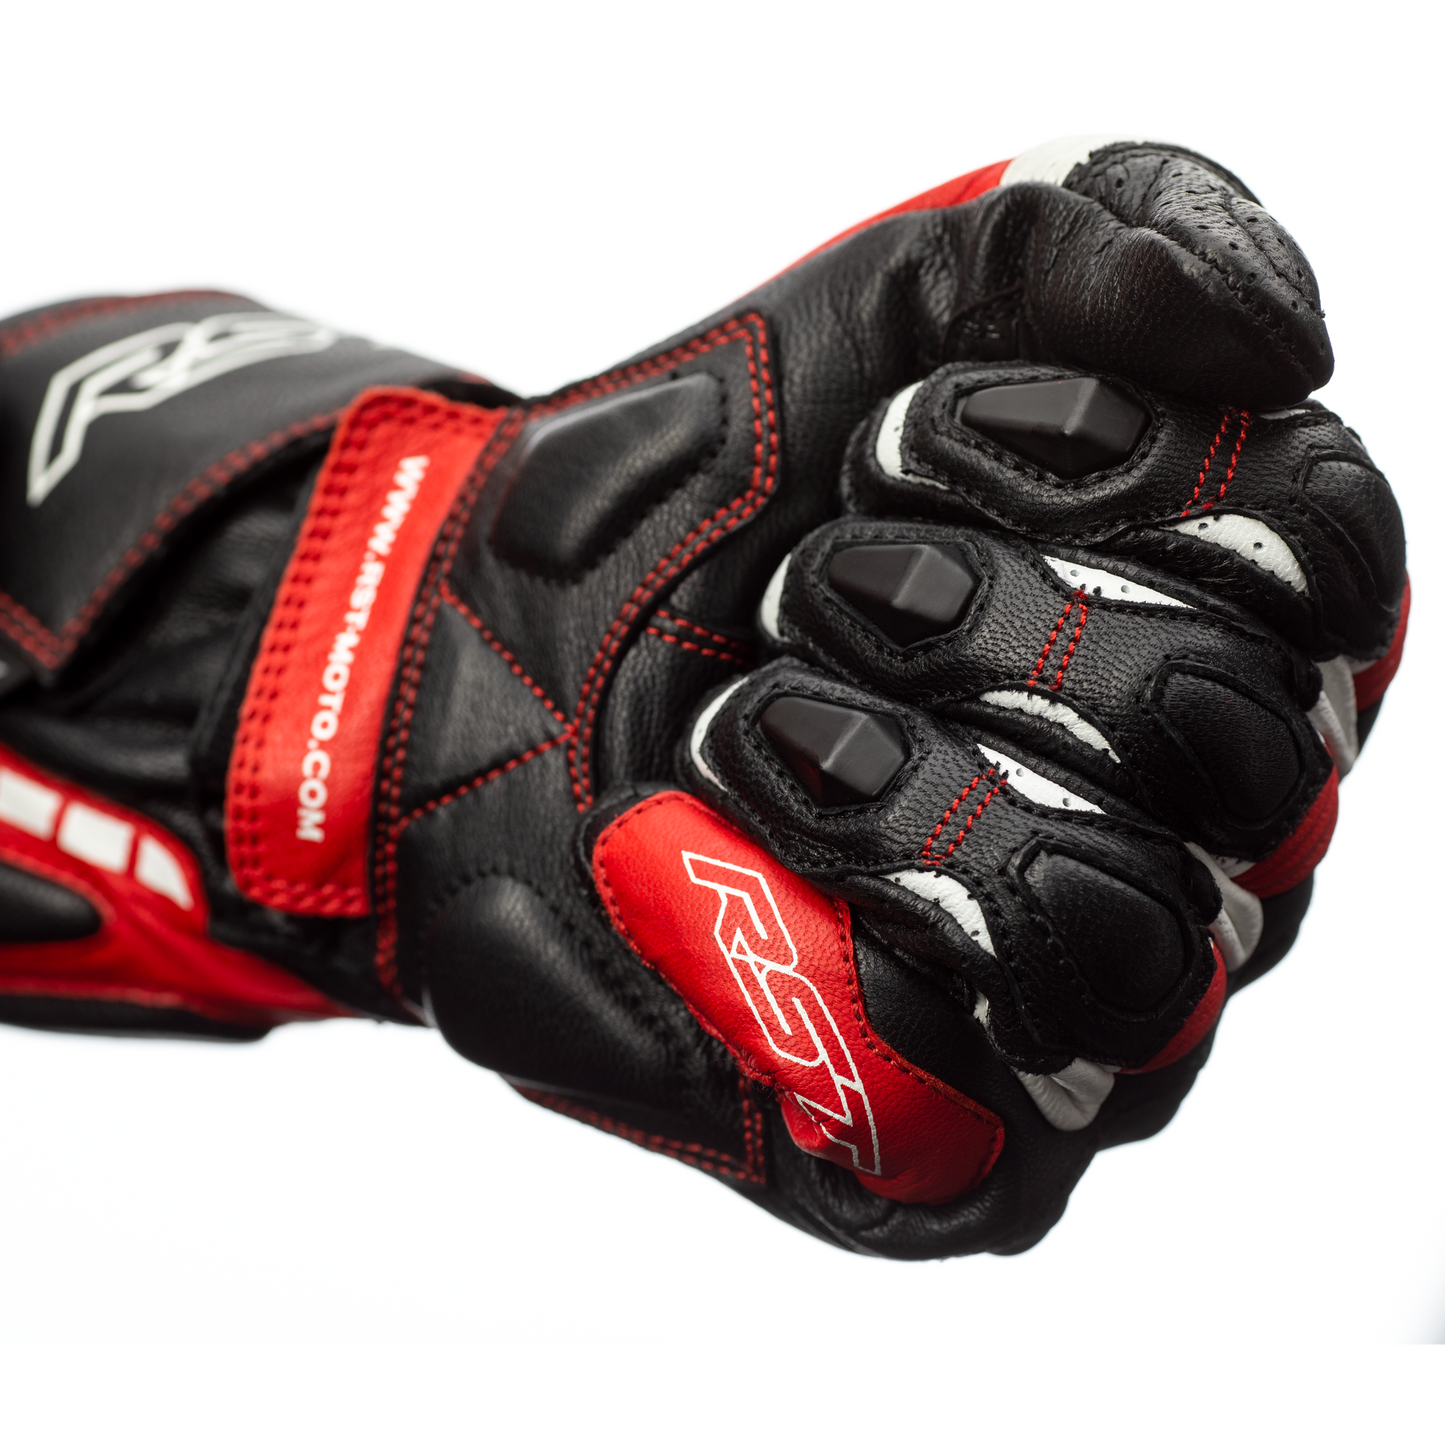 RST Axis Leather Riding Gloves - CE APPROVED - Red